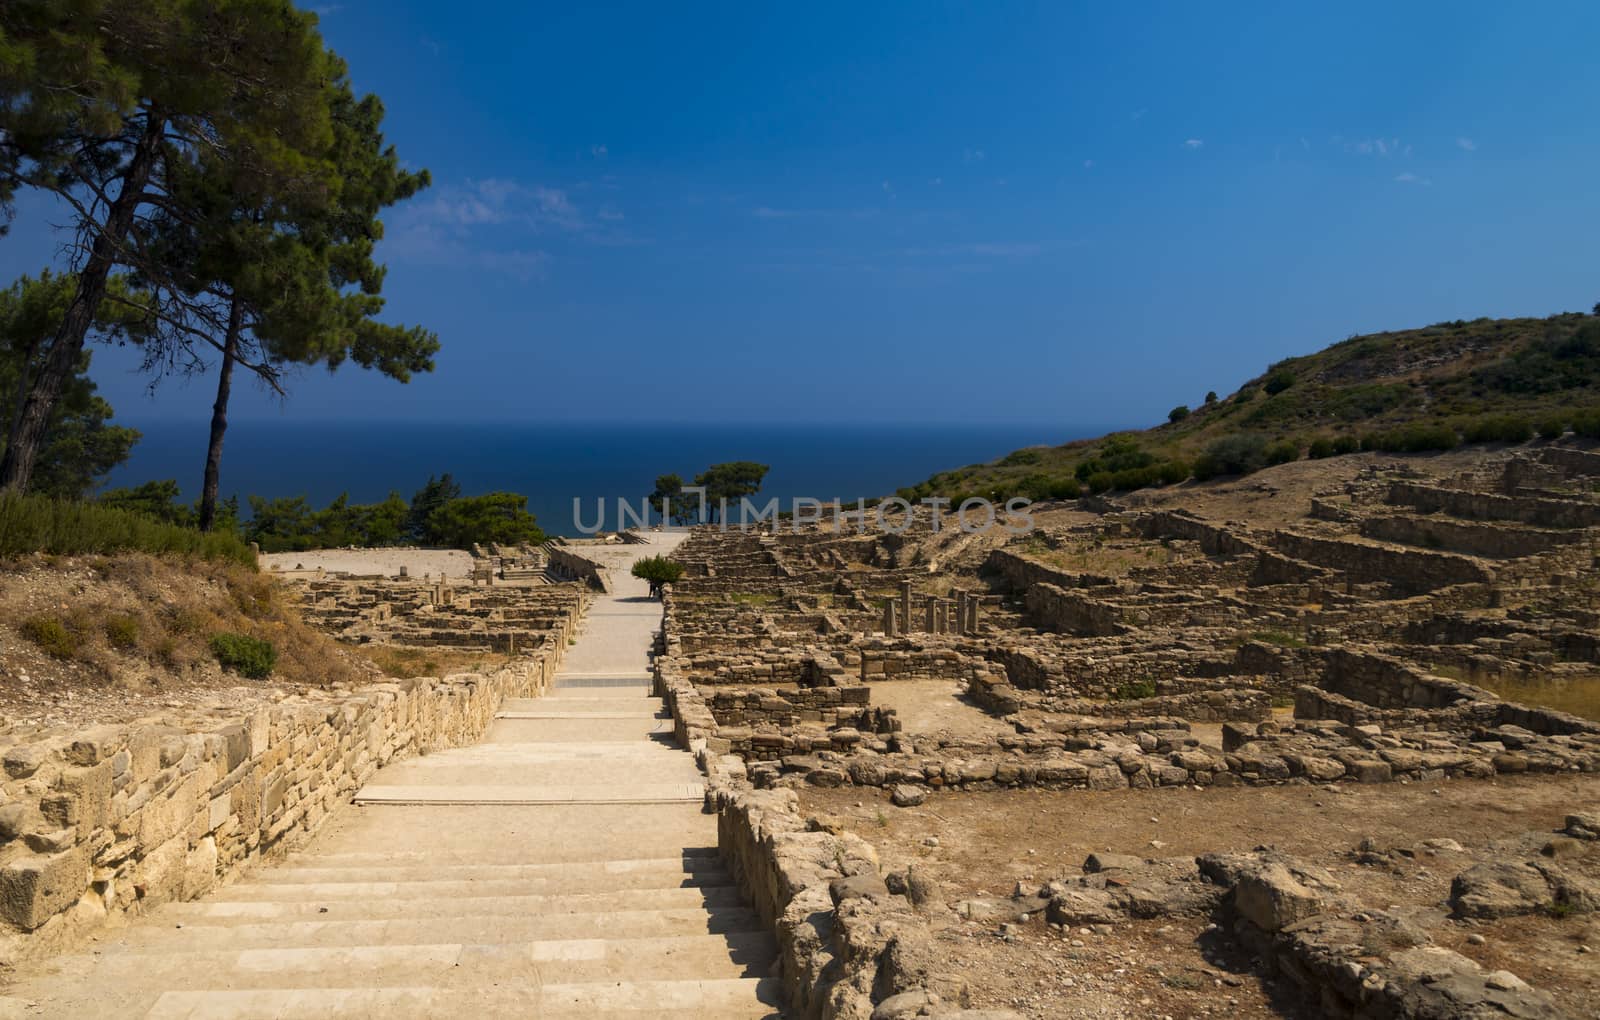 The ancient city of Kamiros on the Aegean coast of Rhodes